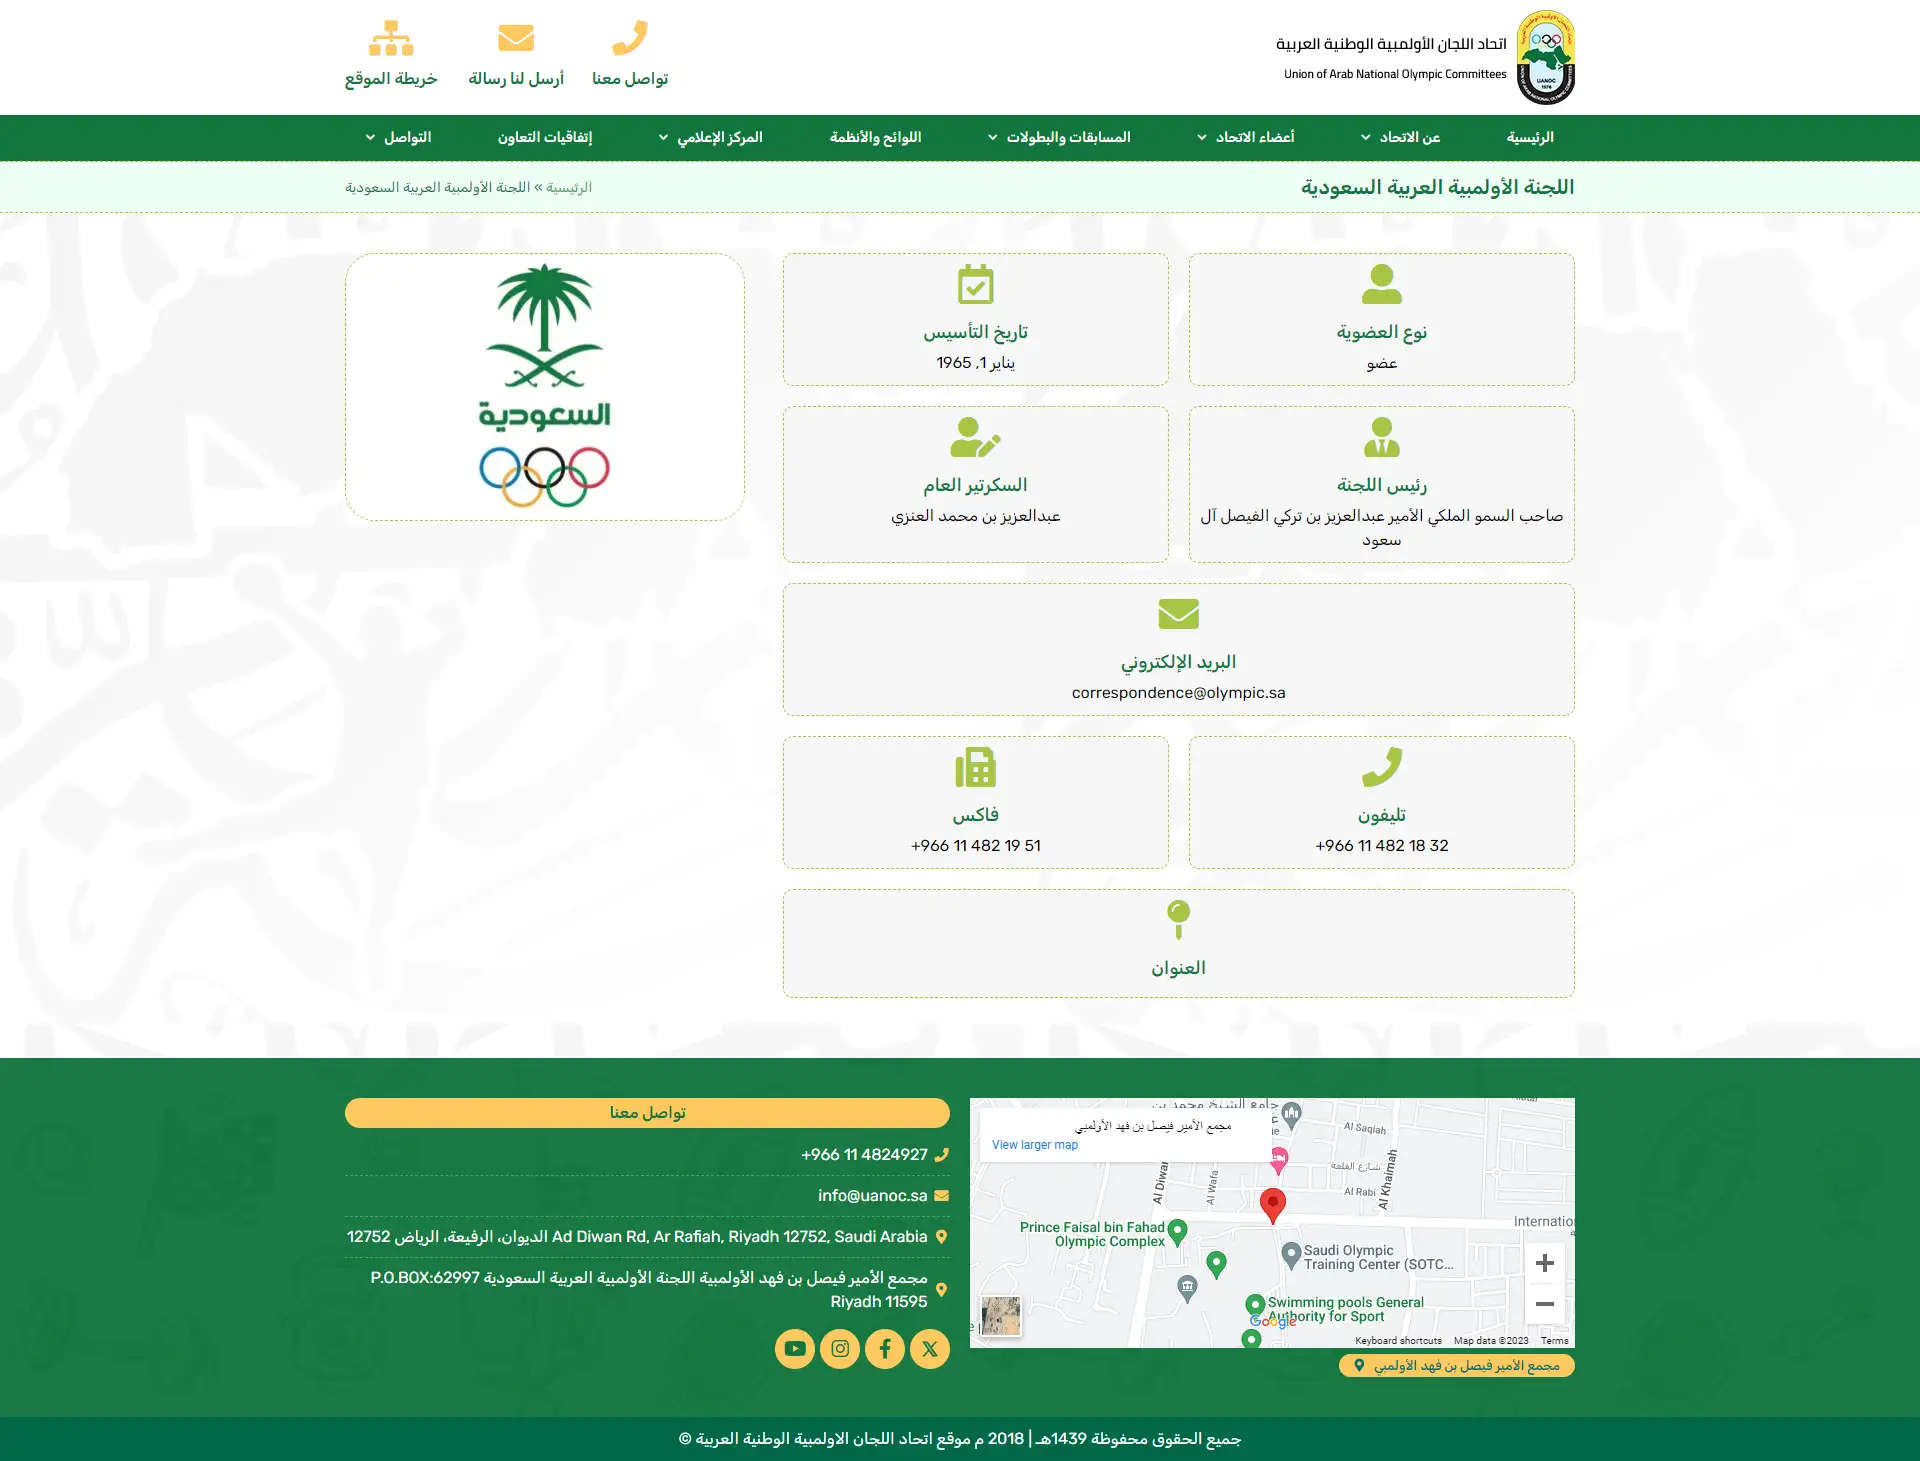 Union of the Arab National Olympic Committee Website